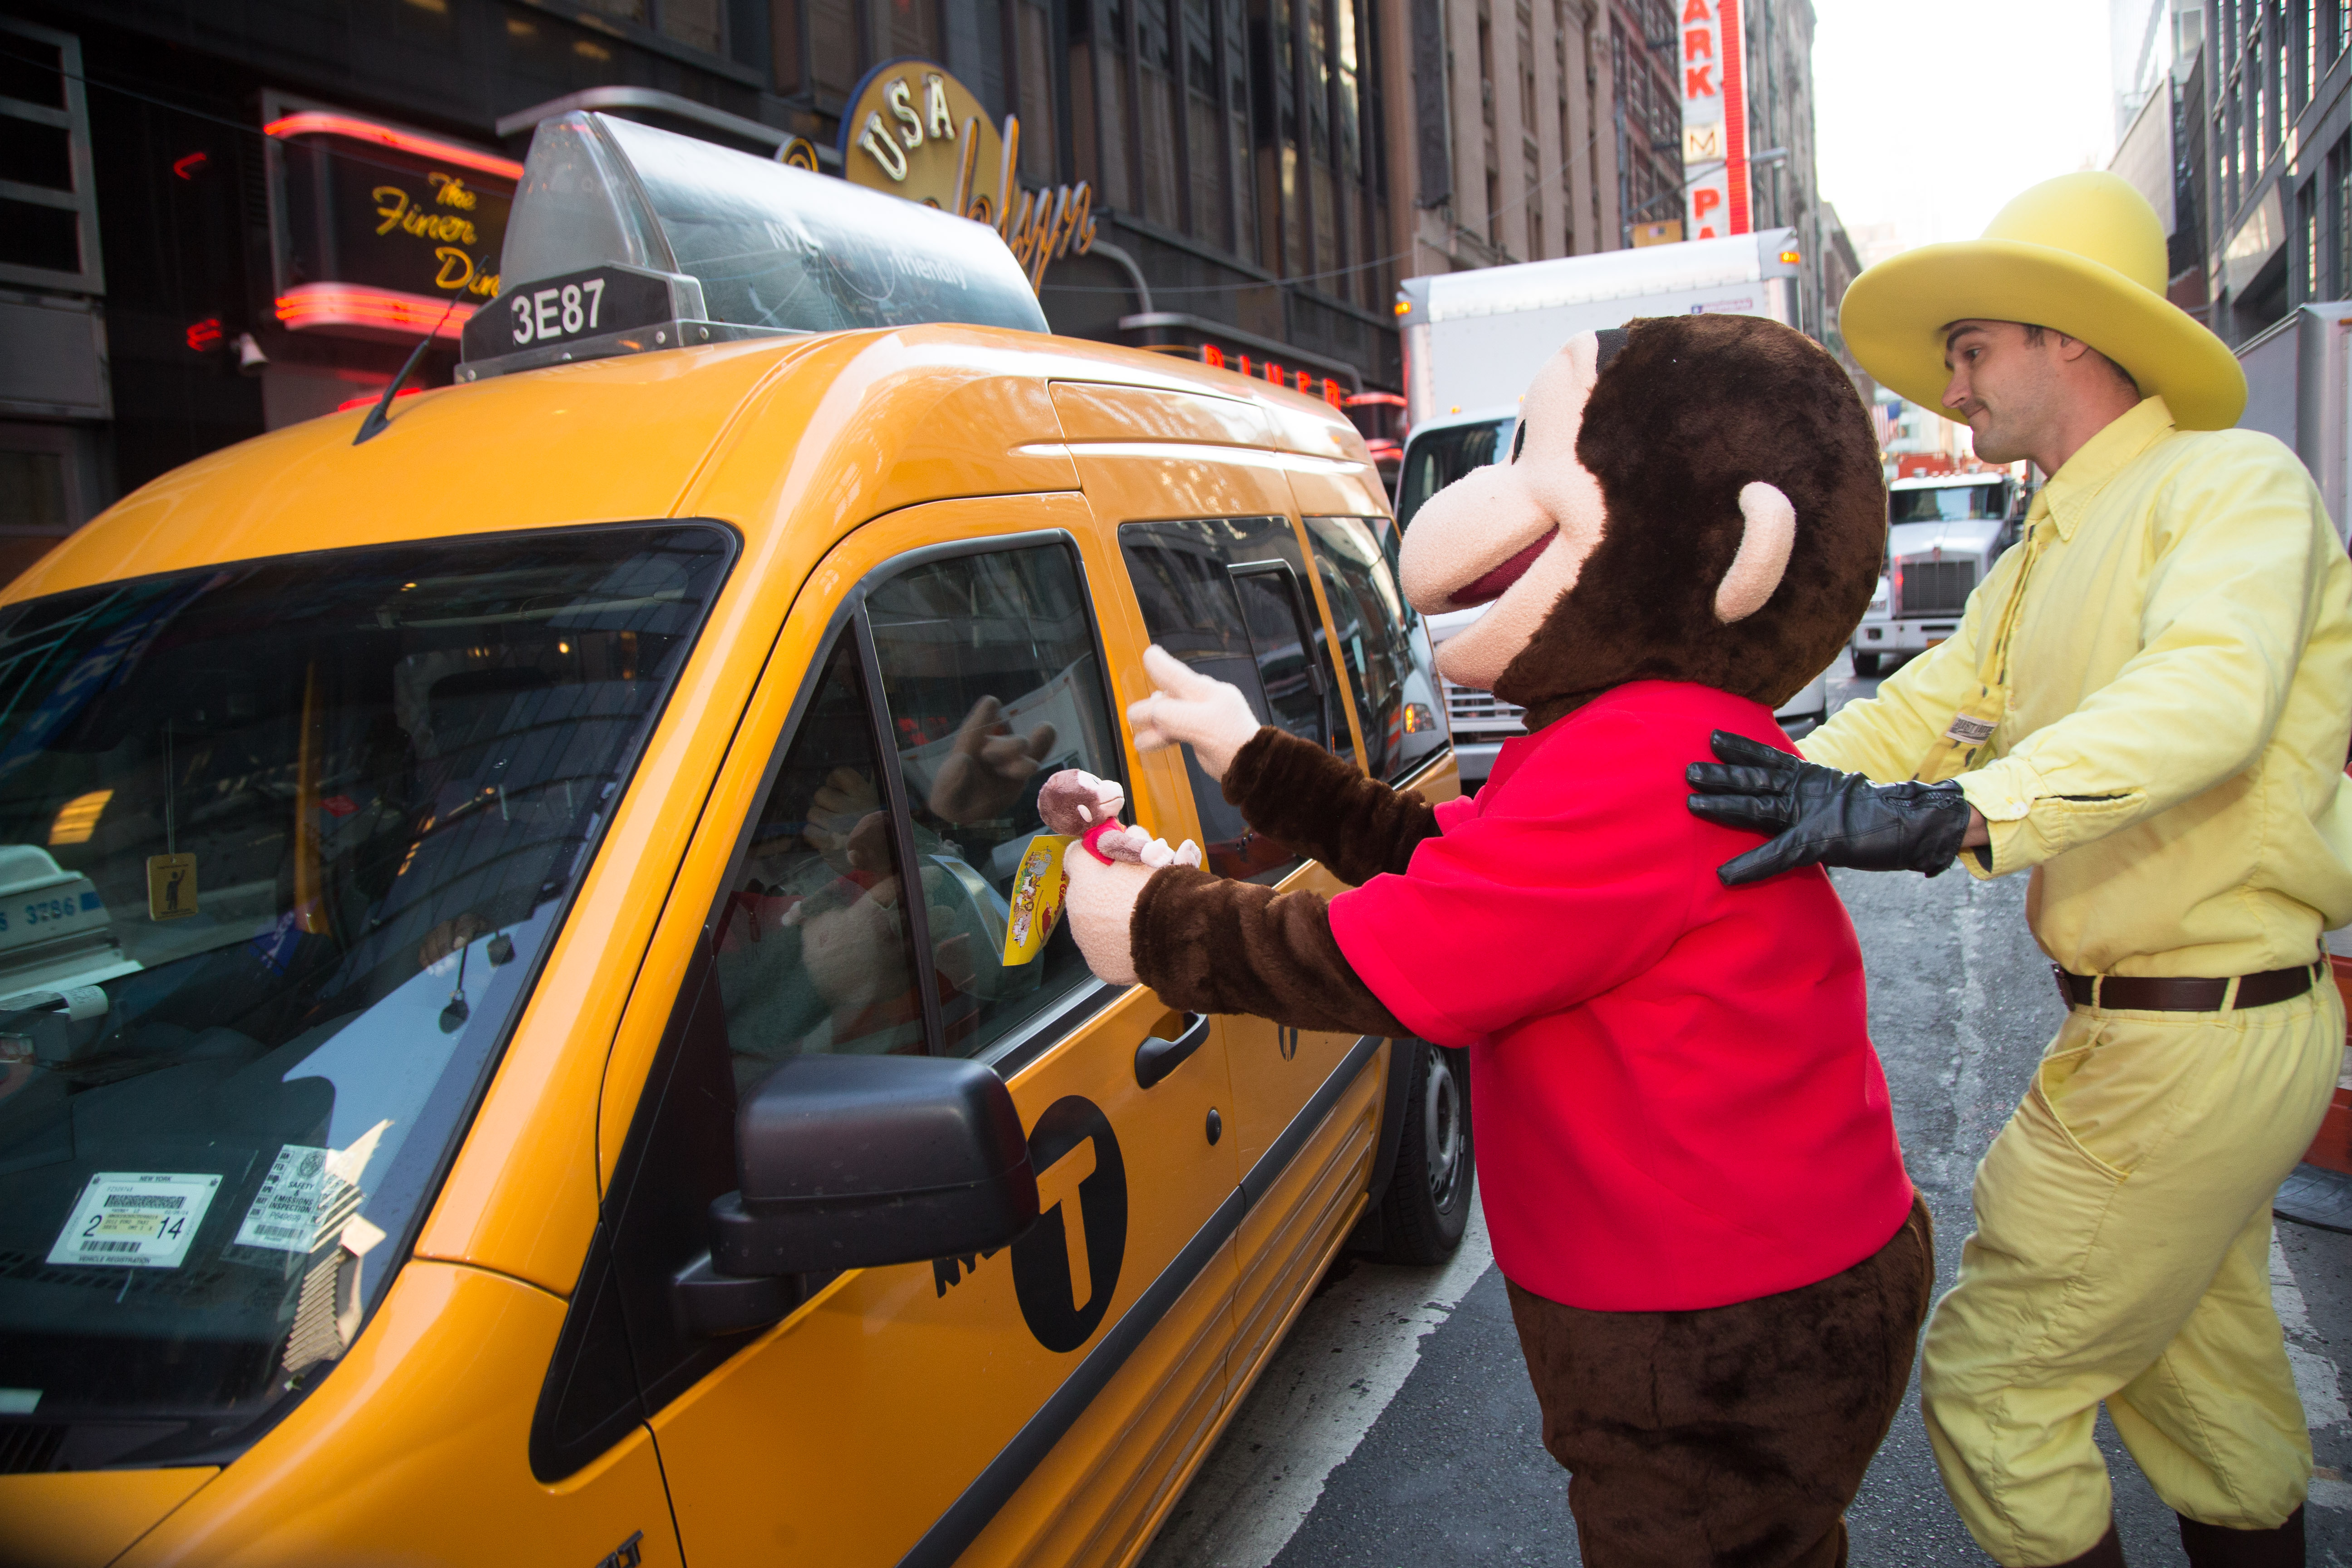 2013 IPO at Times Square. Curious George and The Man With the Yellow Hat